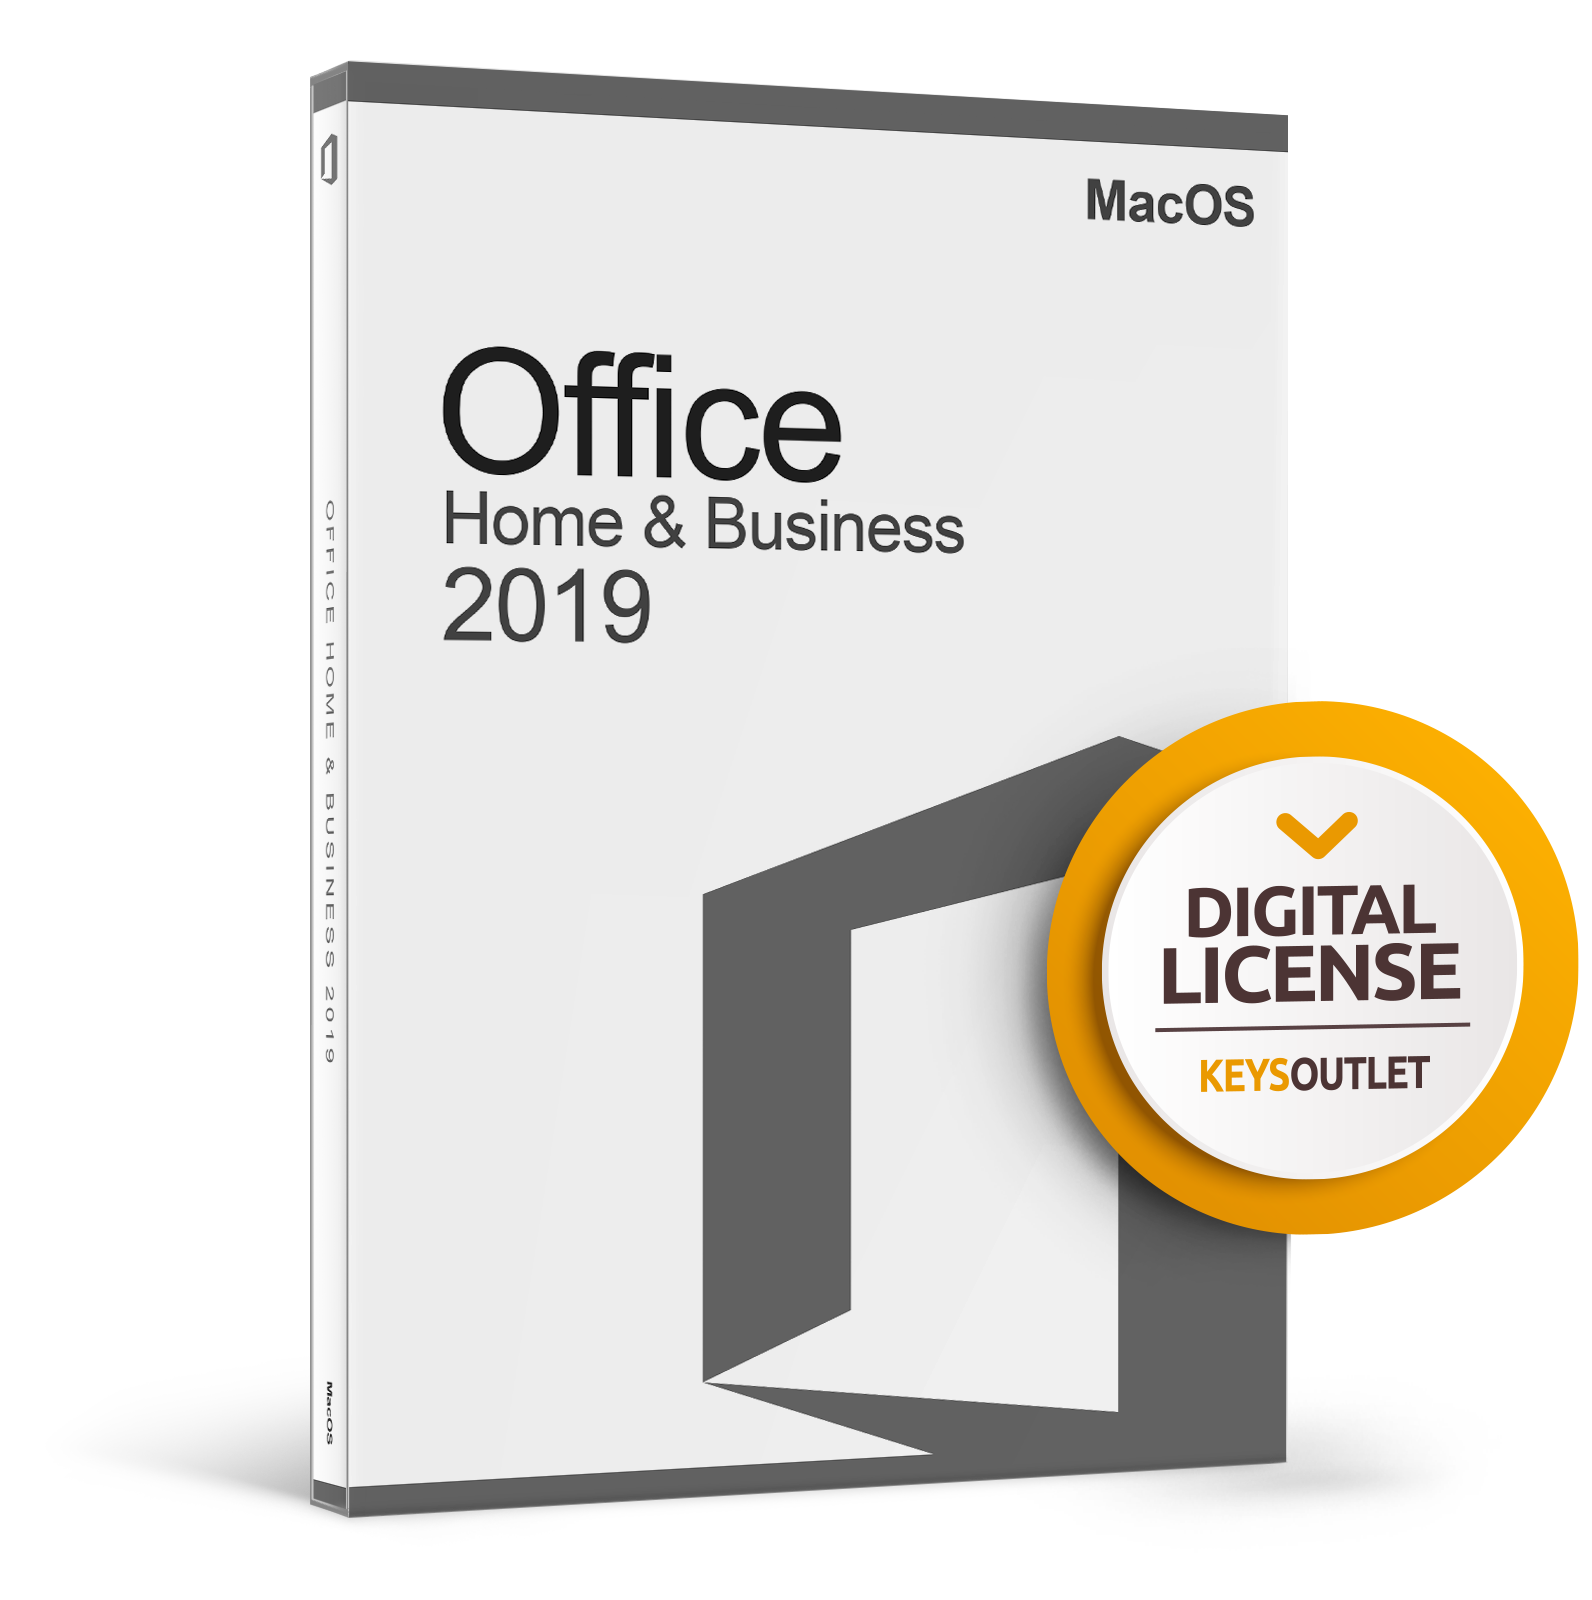 Office 2019 Home & Business MacOS